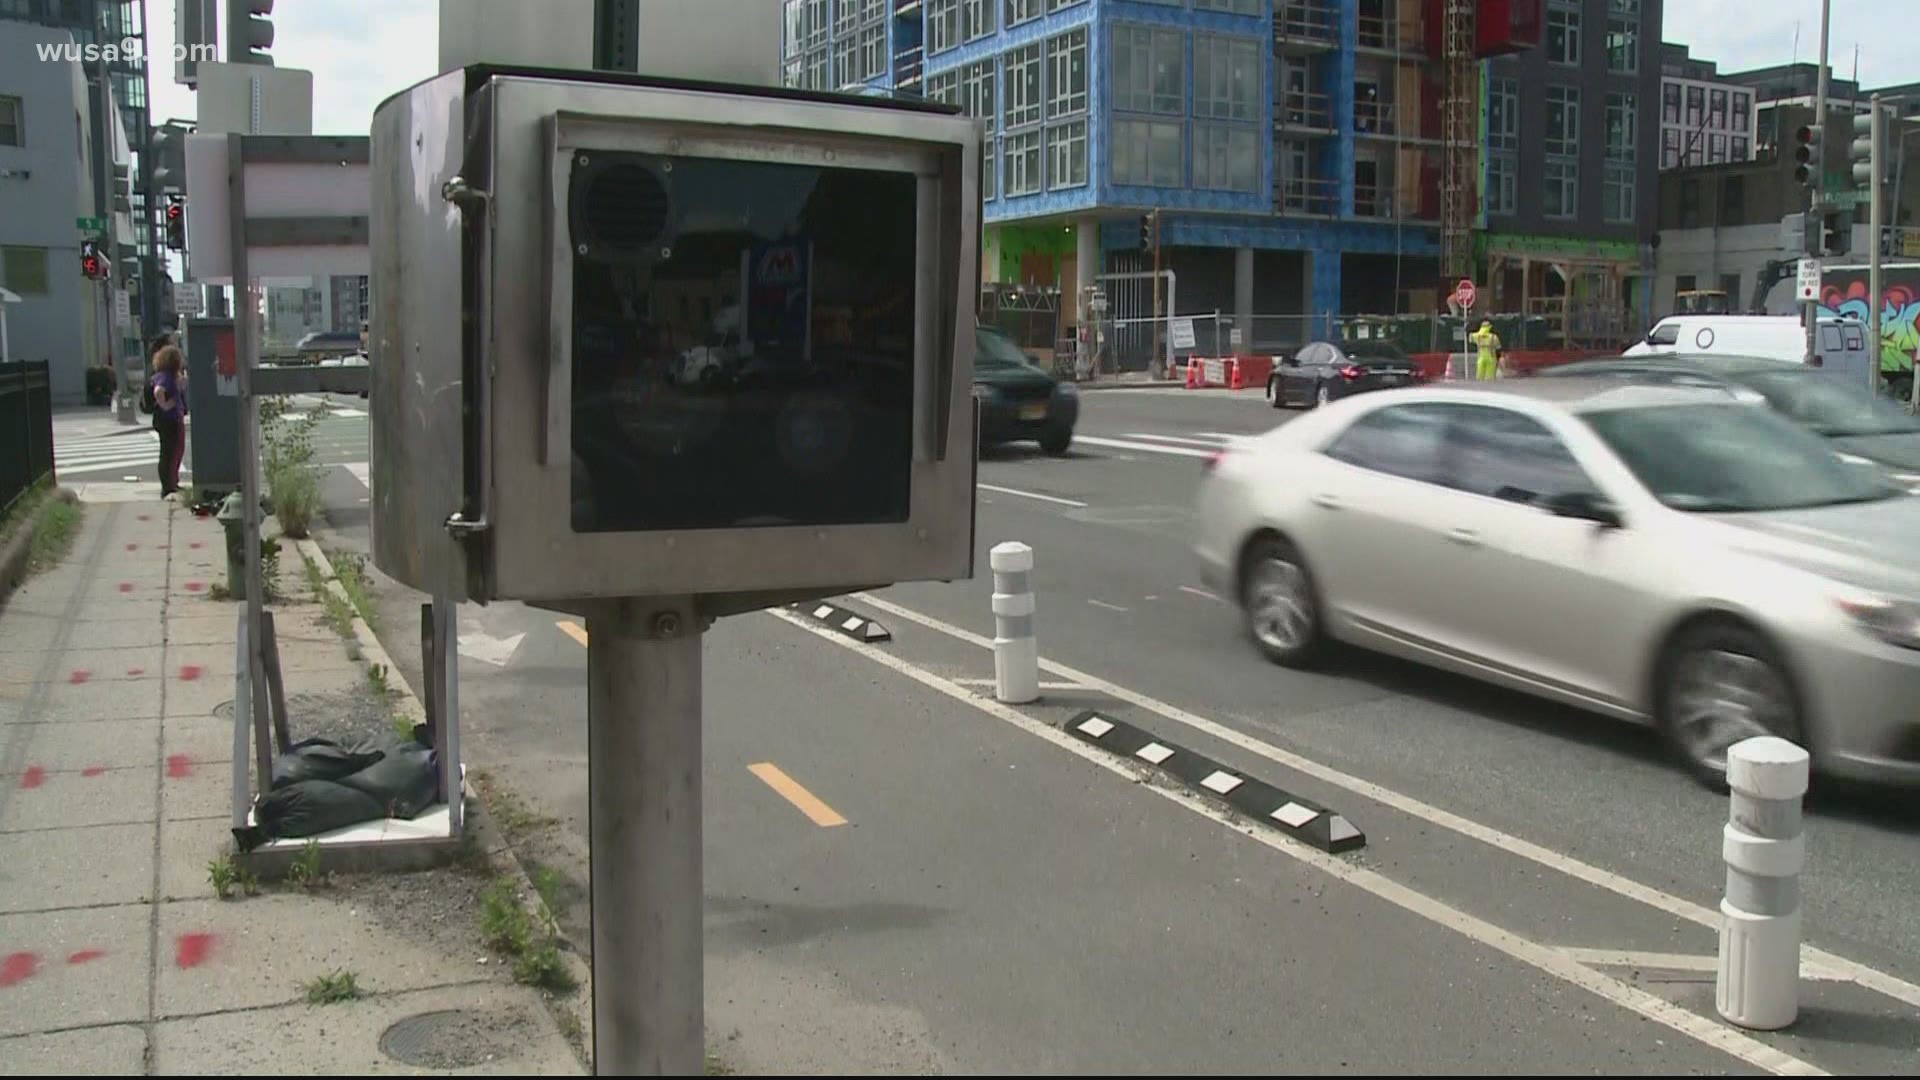 The city also installed seven new speed cameras